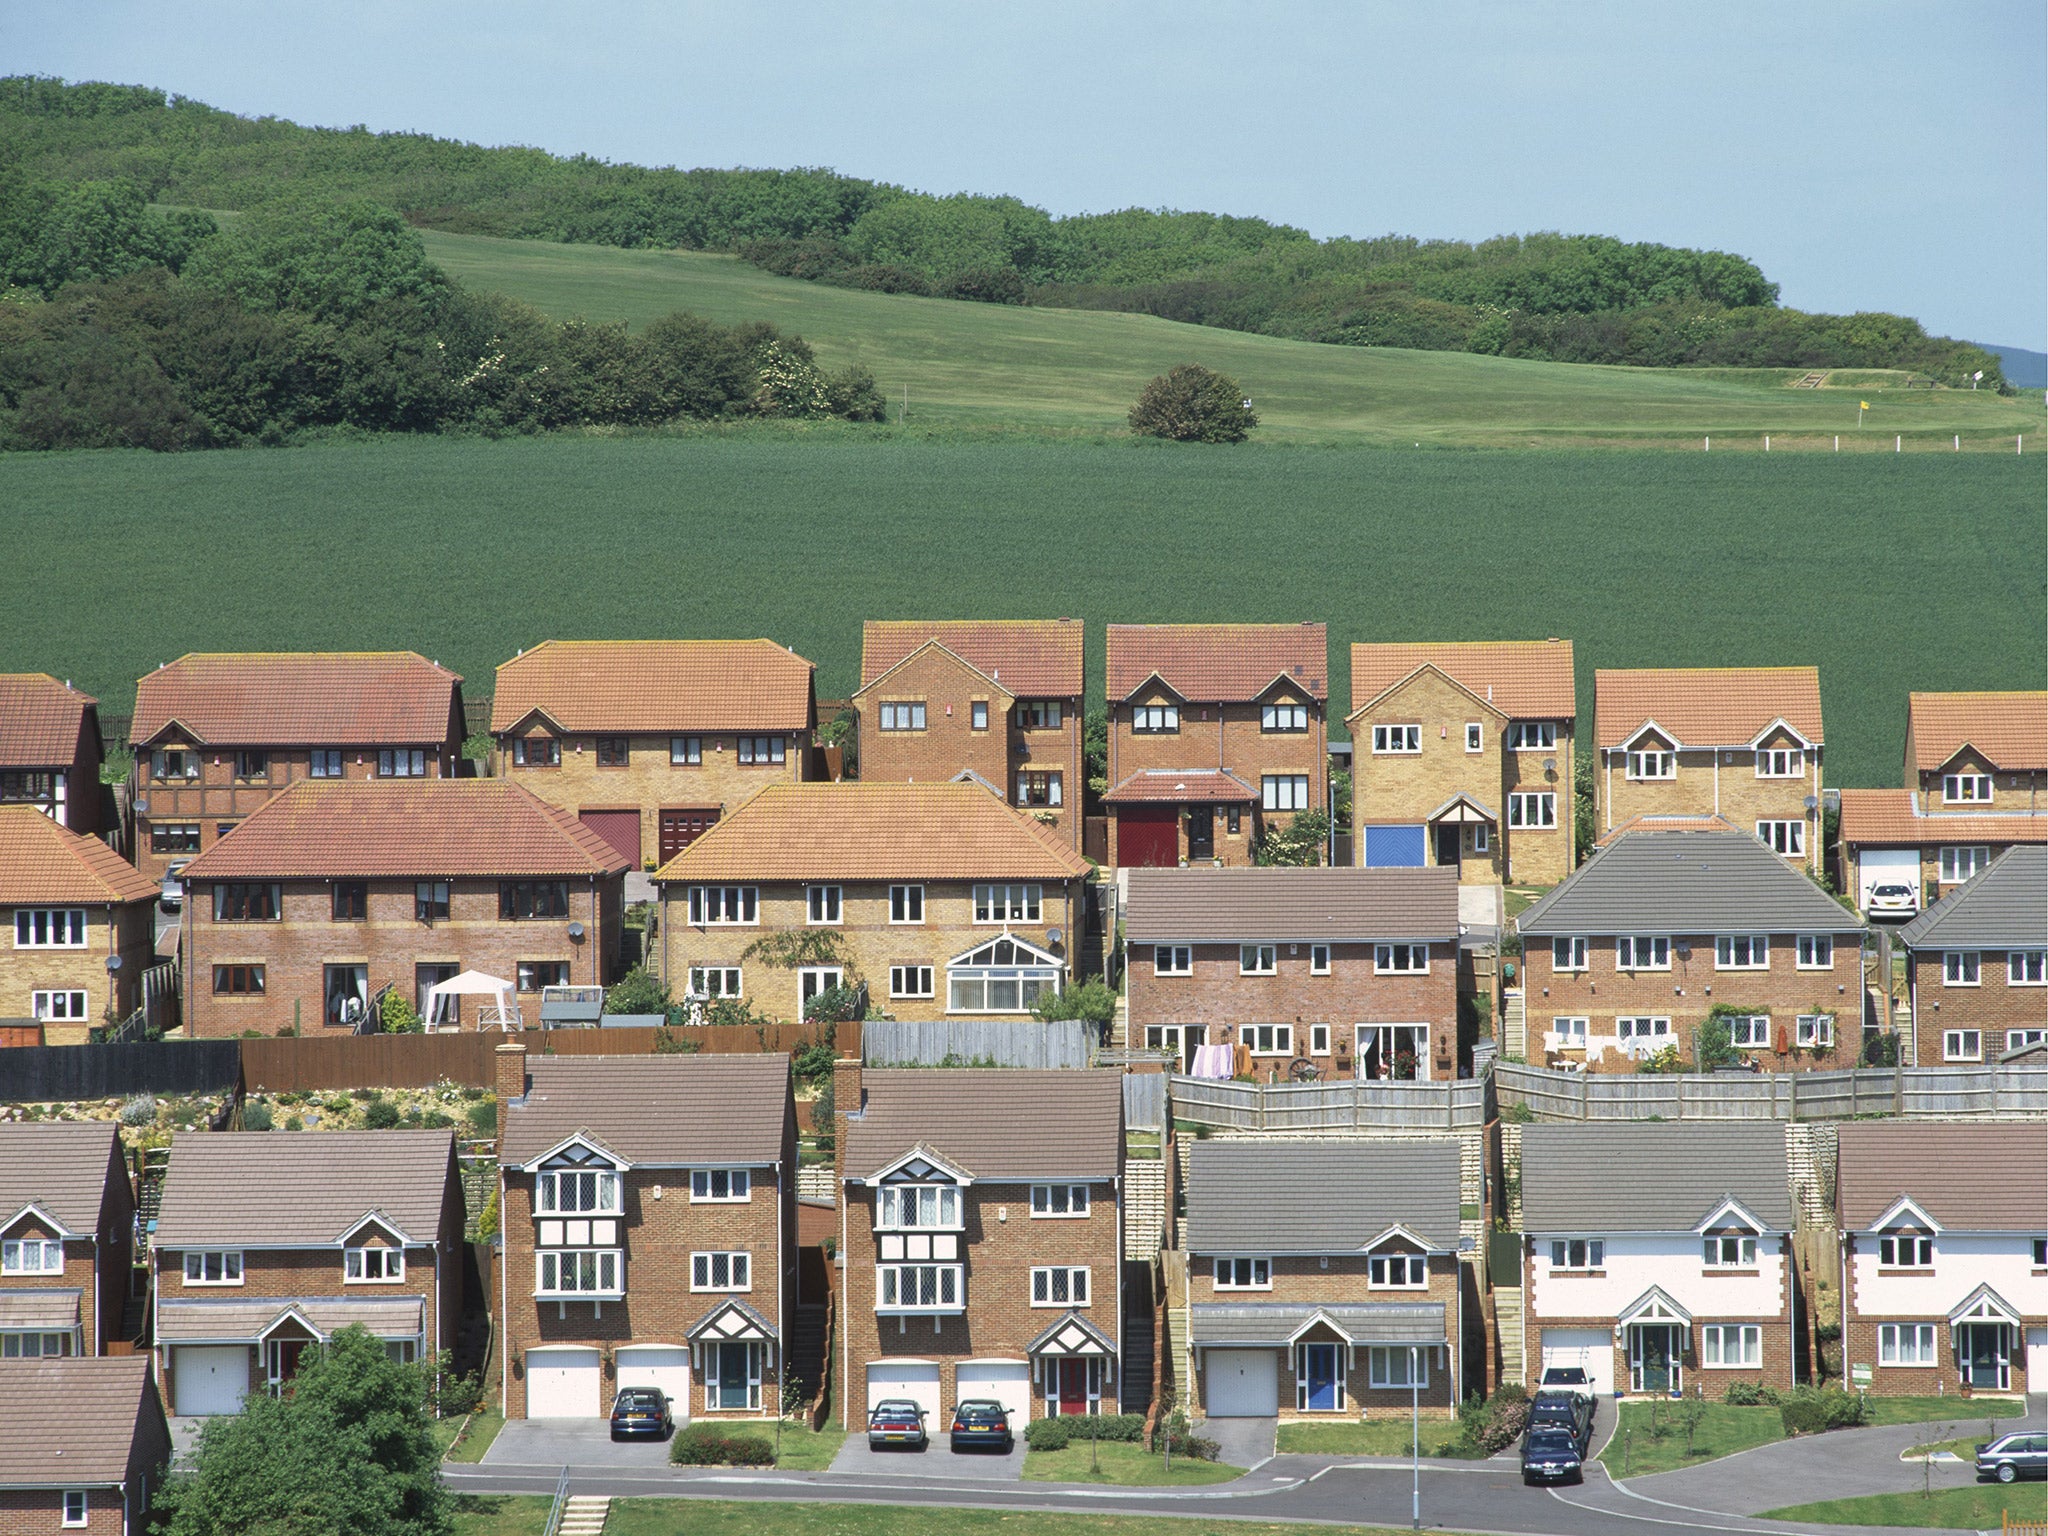 Houses built on land formerly designated as Area of Outstanding Natural Beauty (AONB), in Newhaven, East Sussex